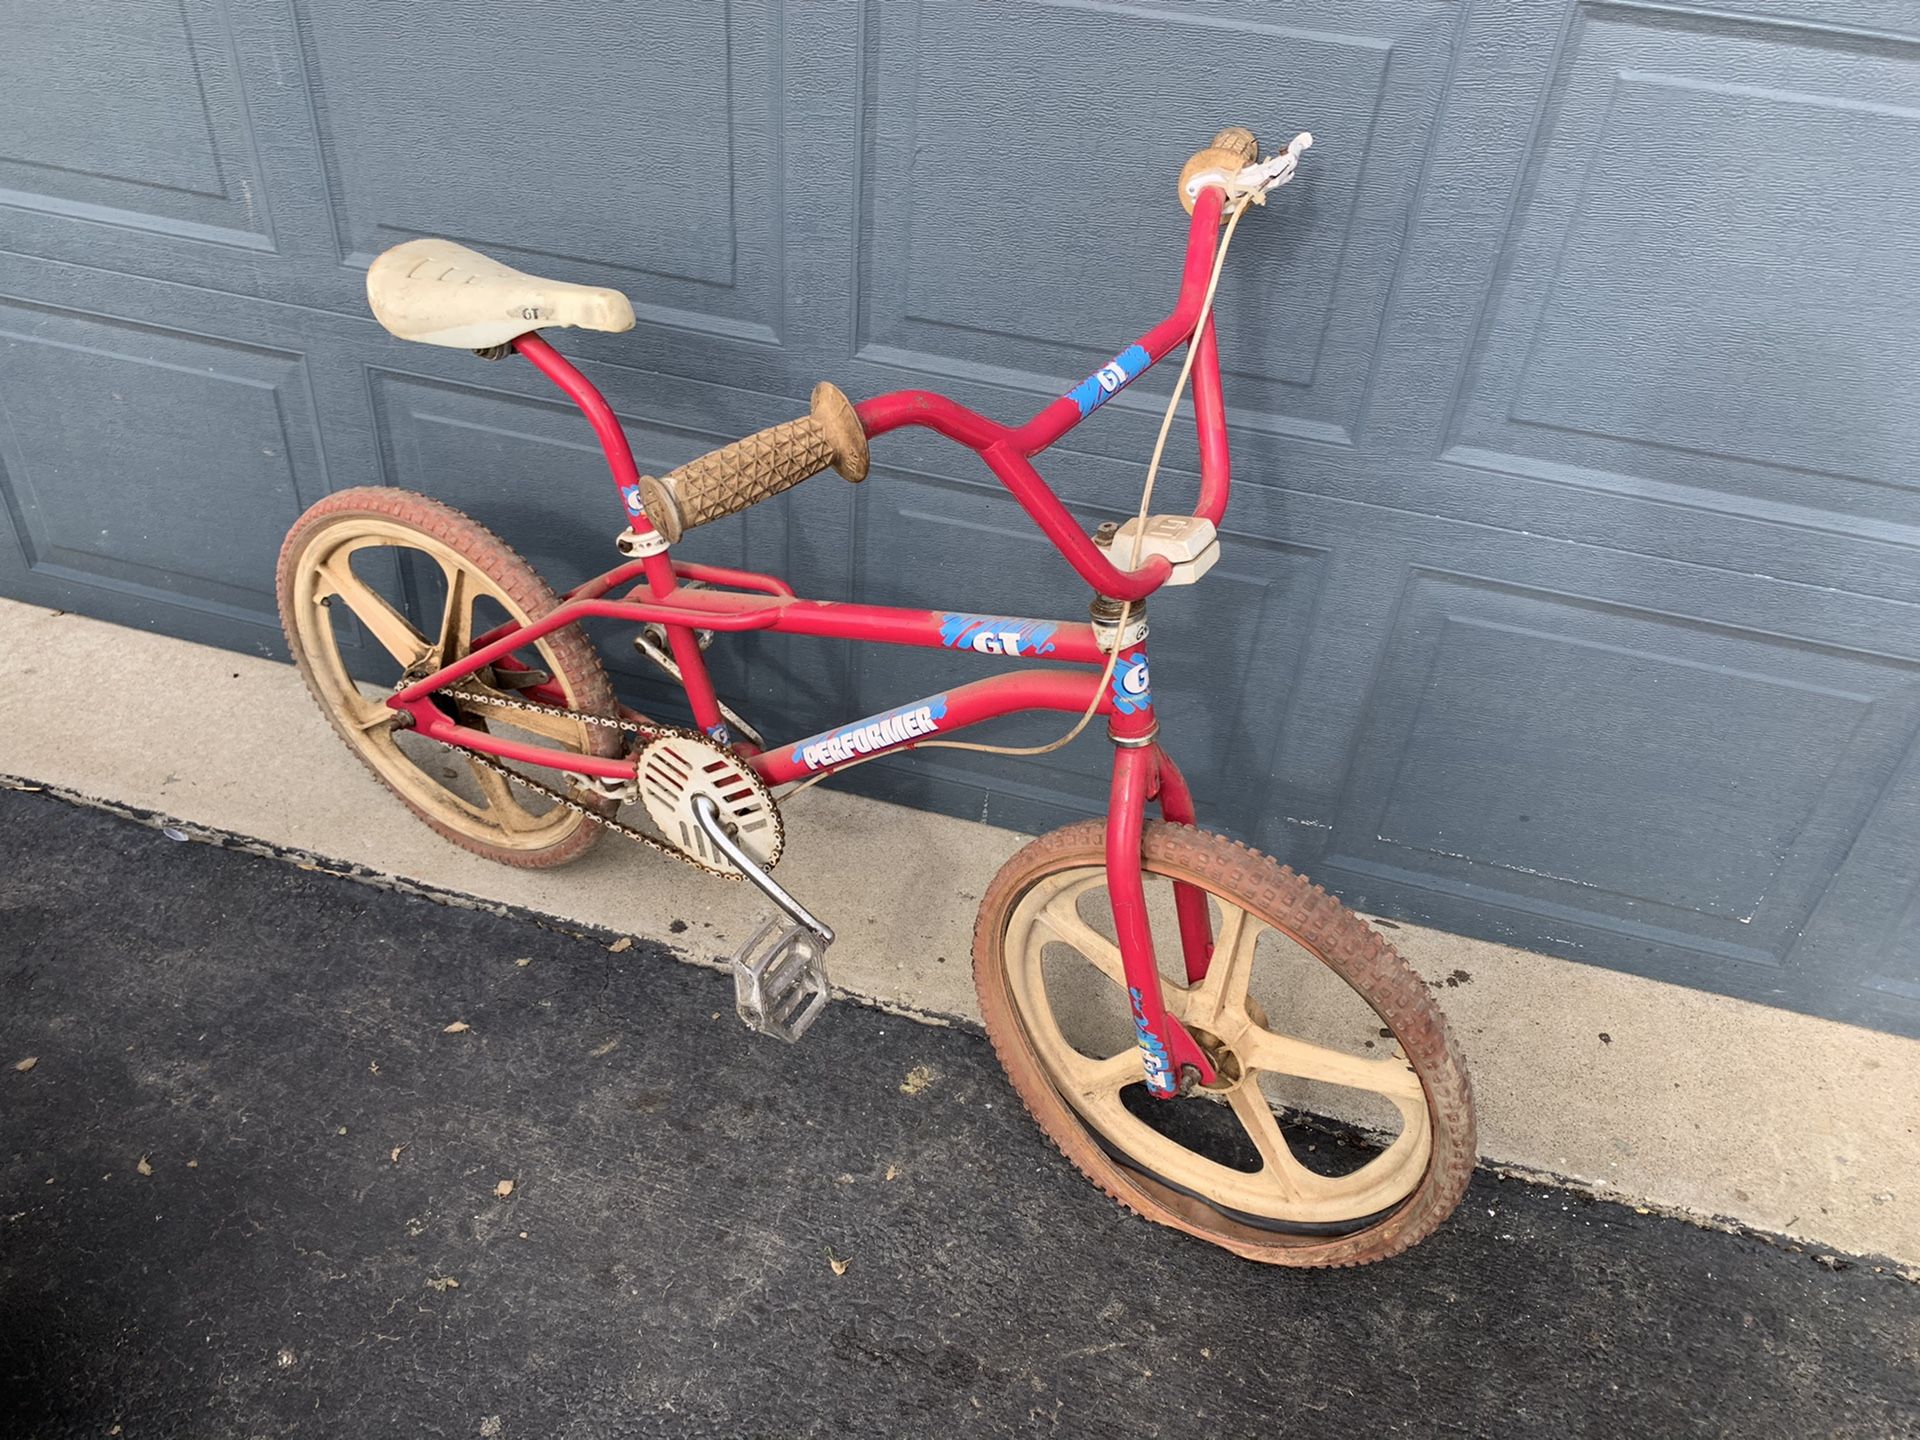 have an old bmx bikes? Thinking about selling? Let me know.